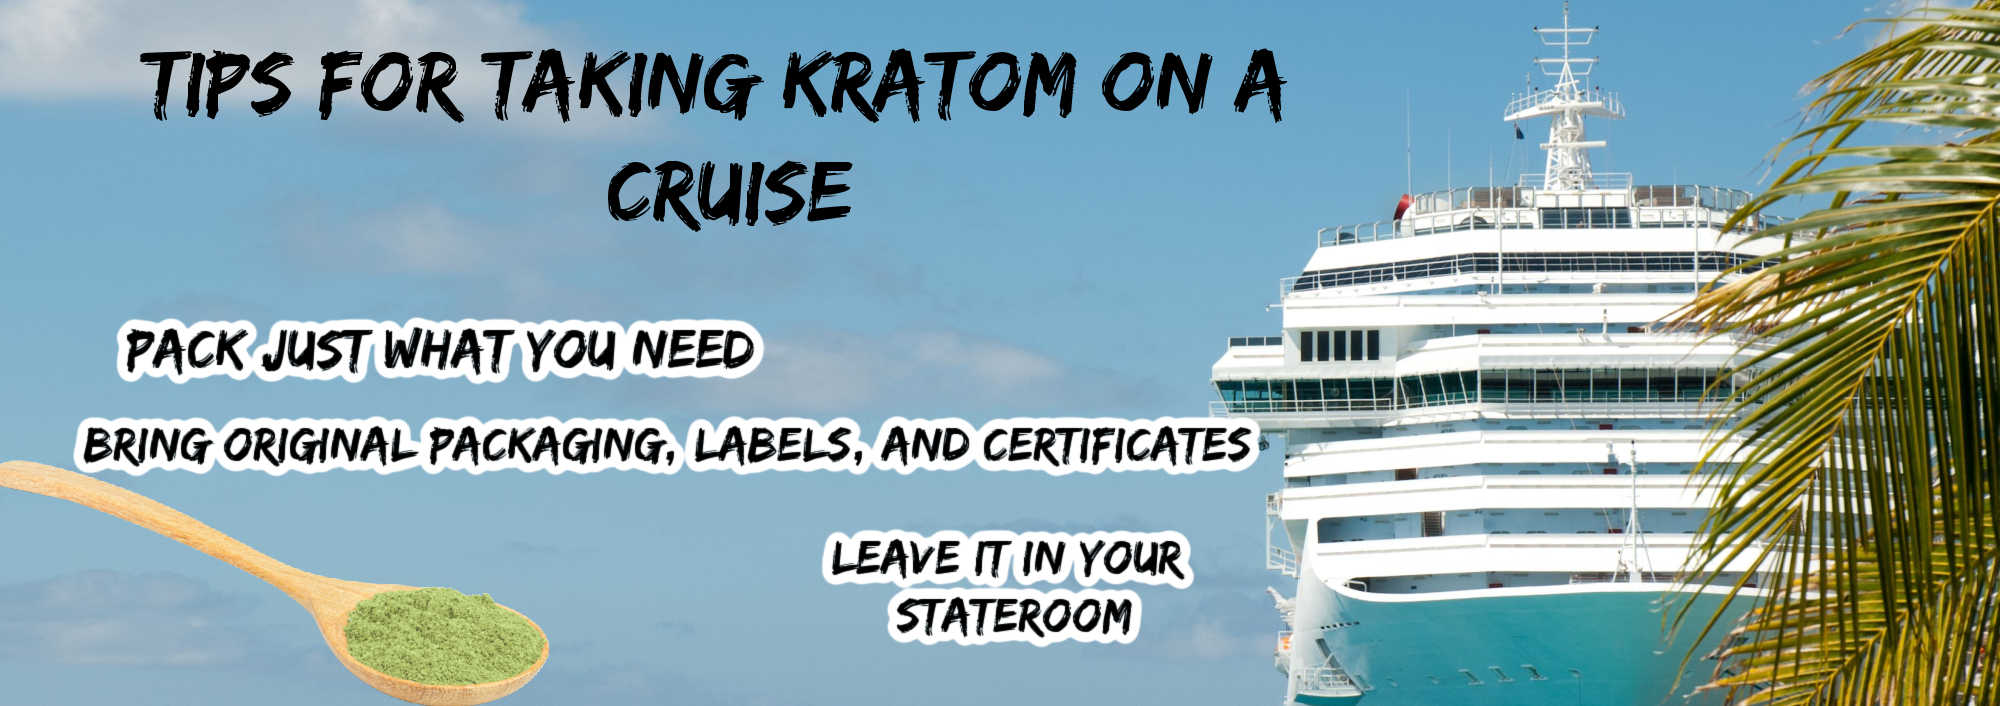 image of tips for taking kratom on a cruise